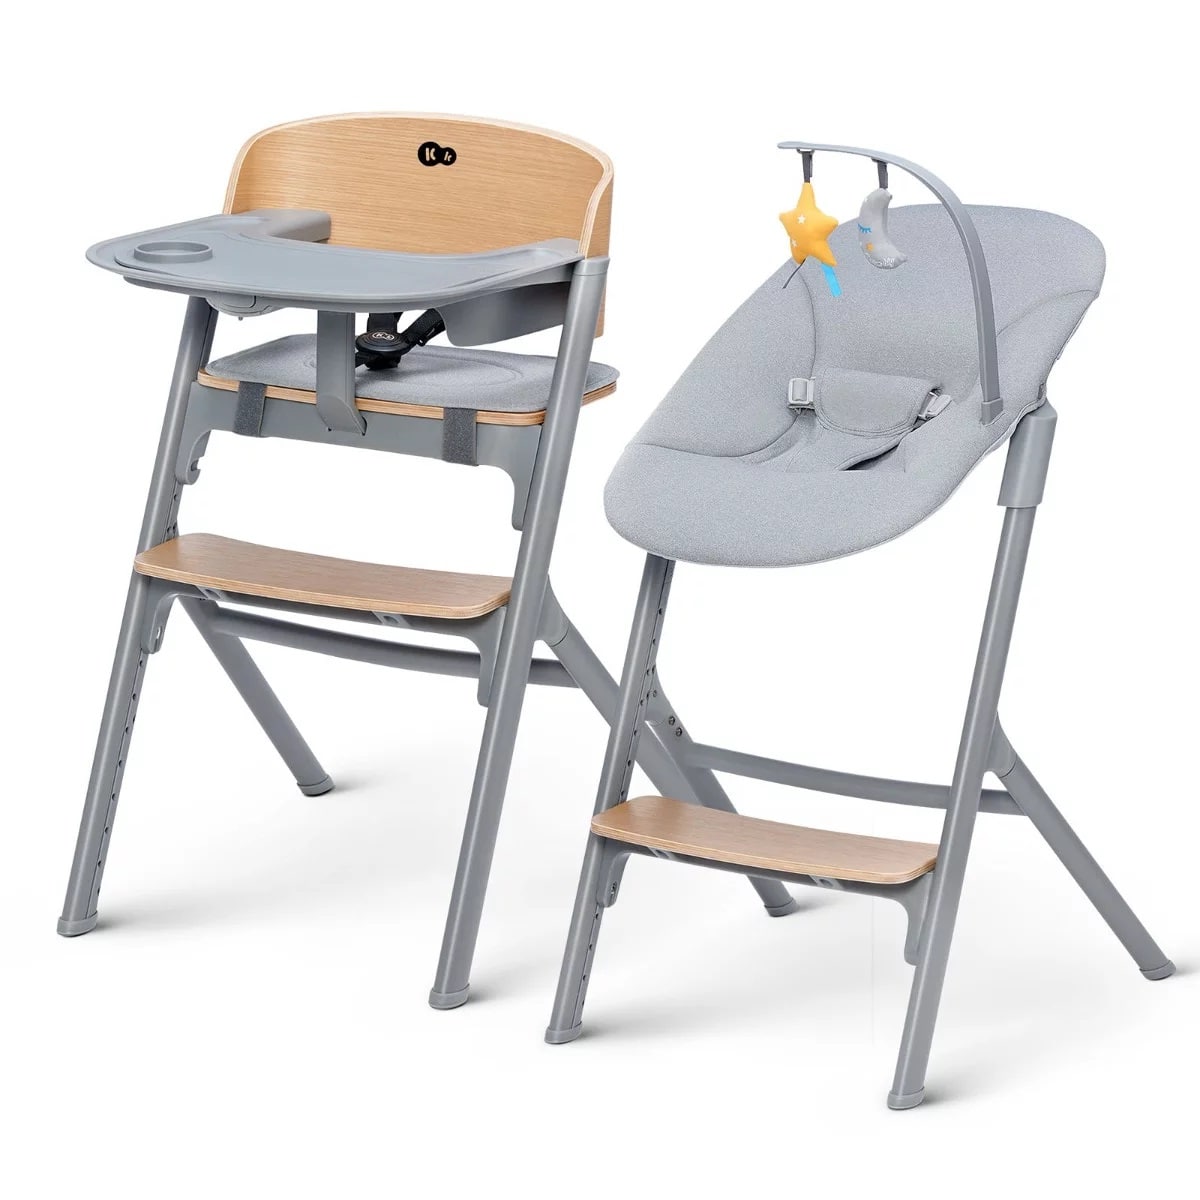 High Chair LIVY and CALMEE wooden from Kinderkraft